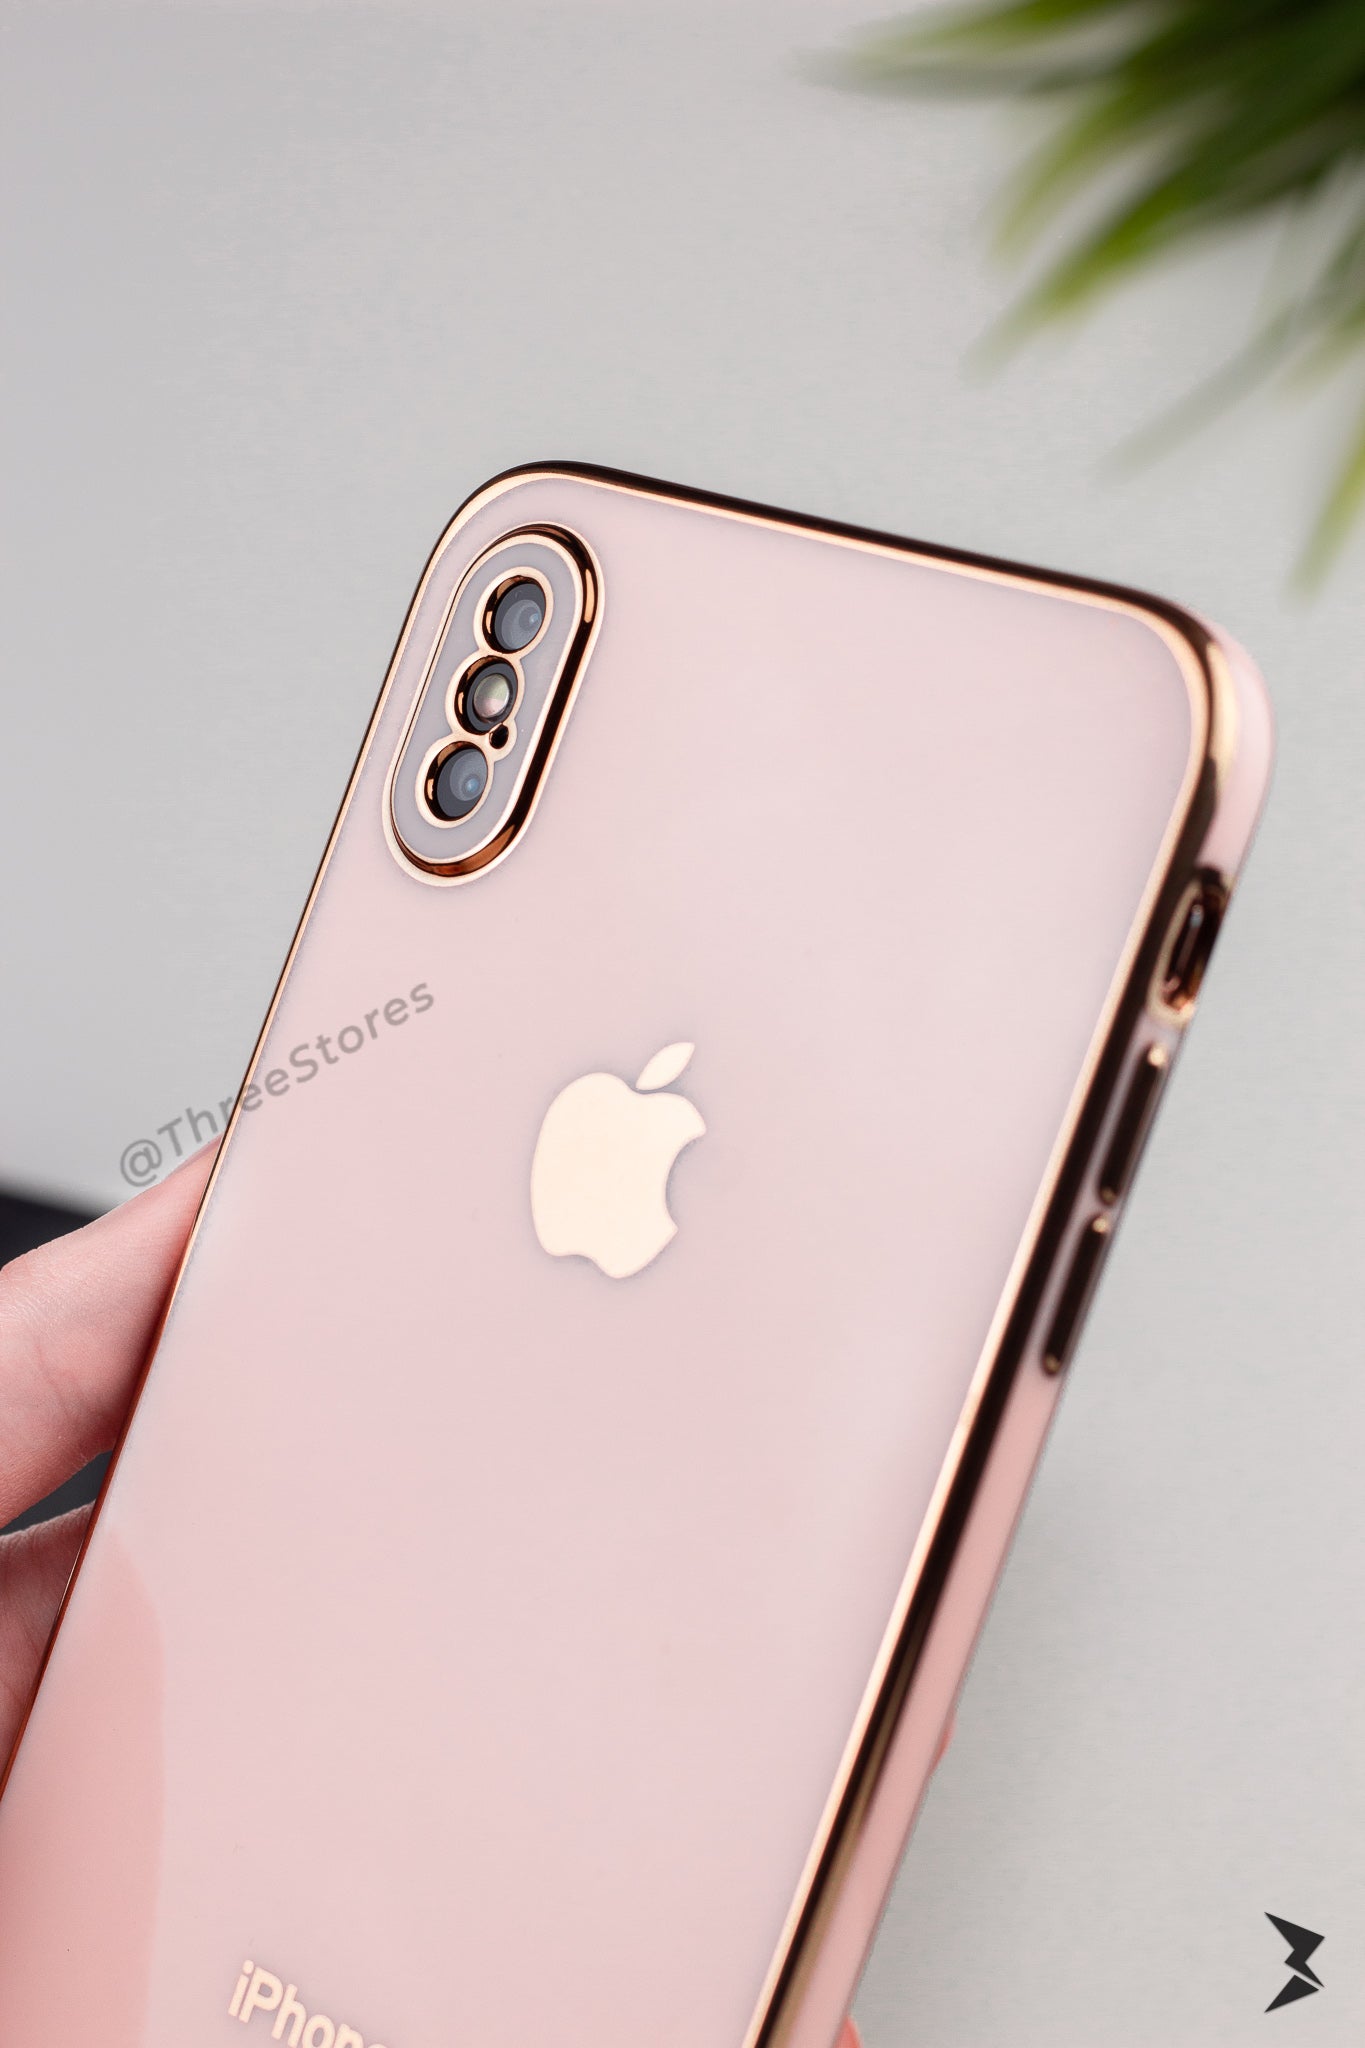 Plating Gold Lens Protection Case iPhone X Max